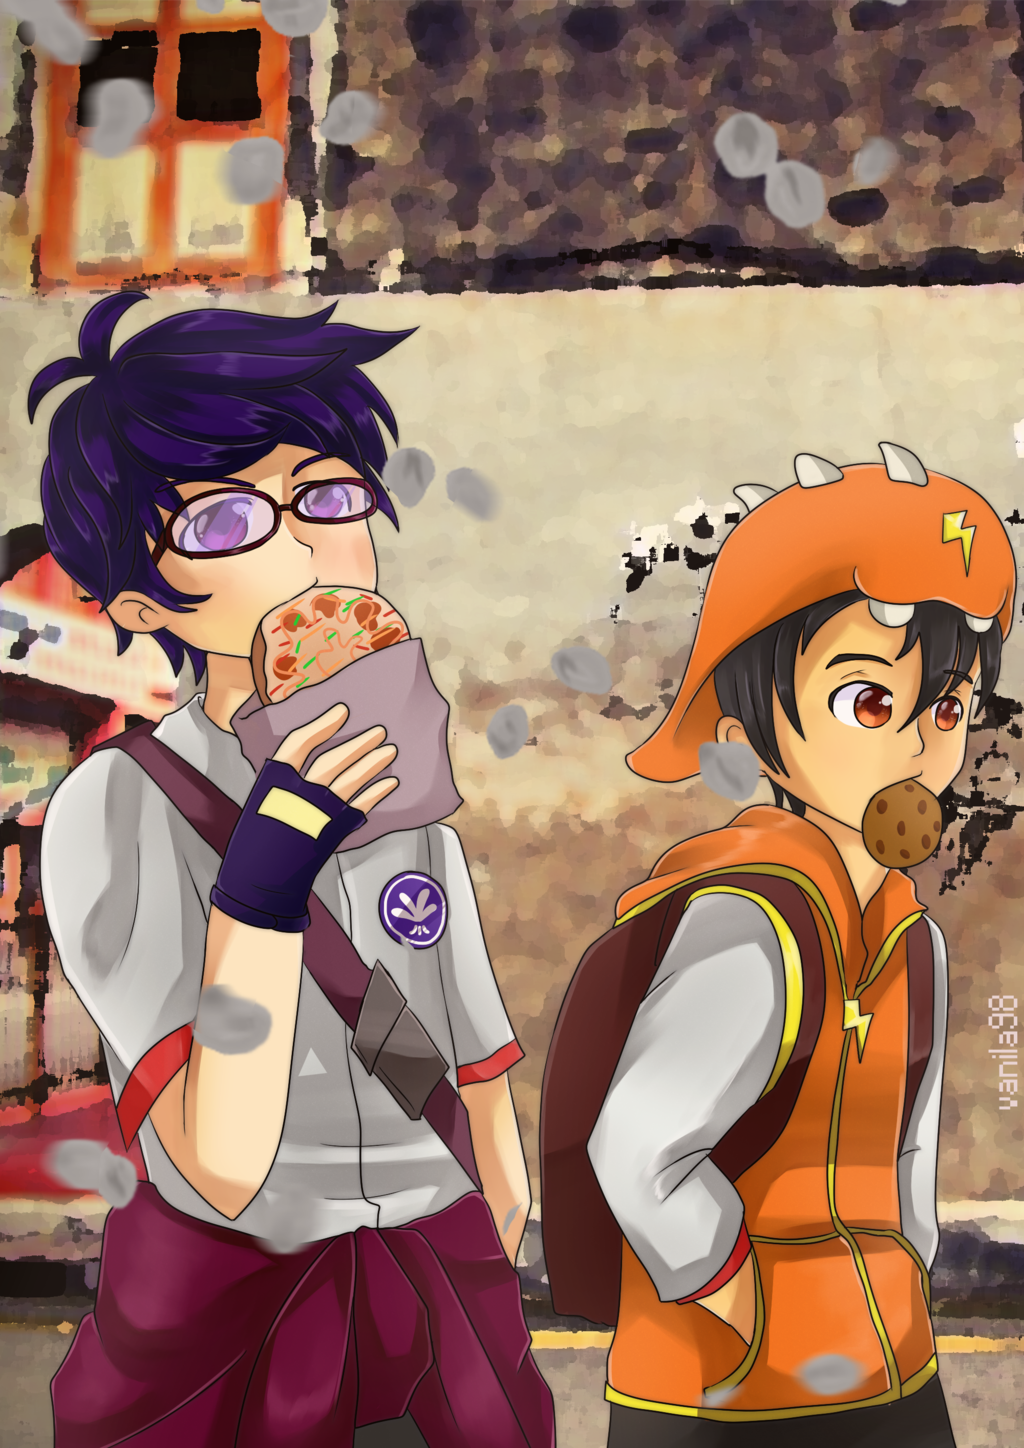 Boboiboy and Fang at street by Fia V98 on